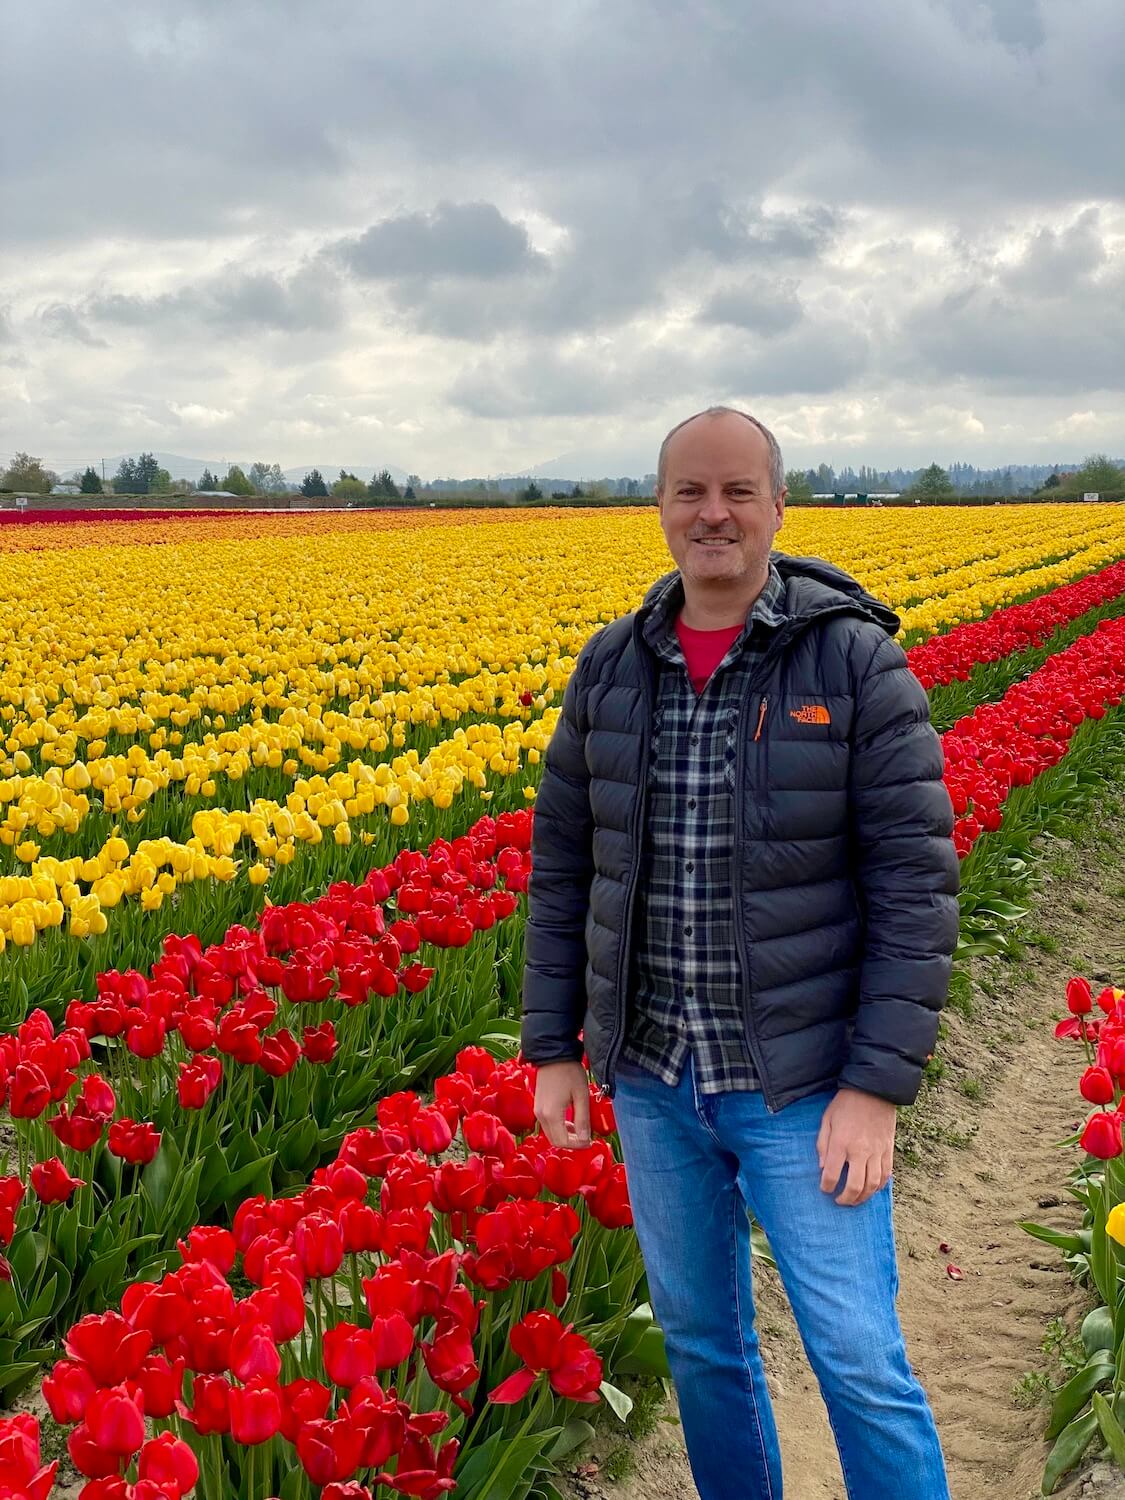 Matthew Kessi stands in front of fields of endless tulips during the Skagit Valley Tulip Festival.  He's wearing a puffy grey North Face jacket and jeans.  